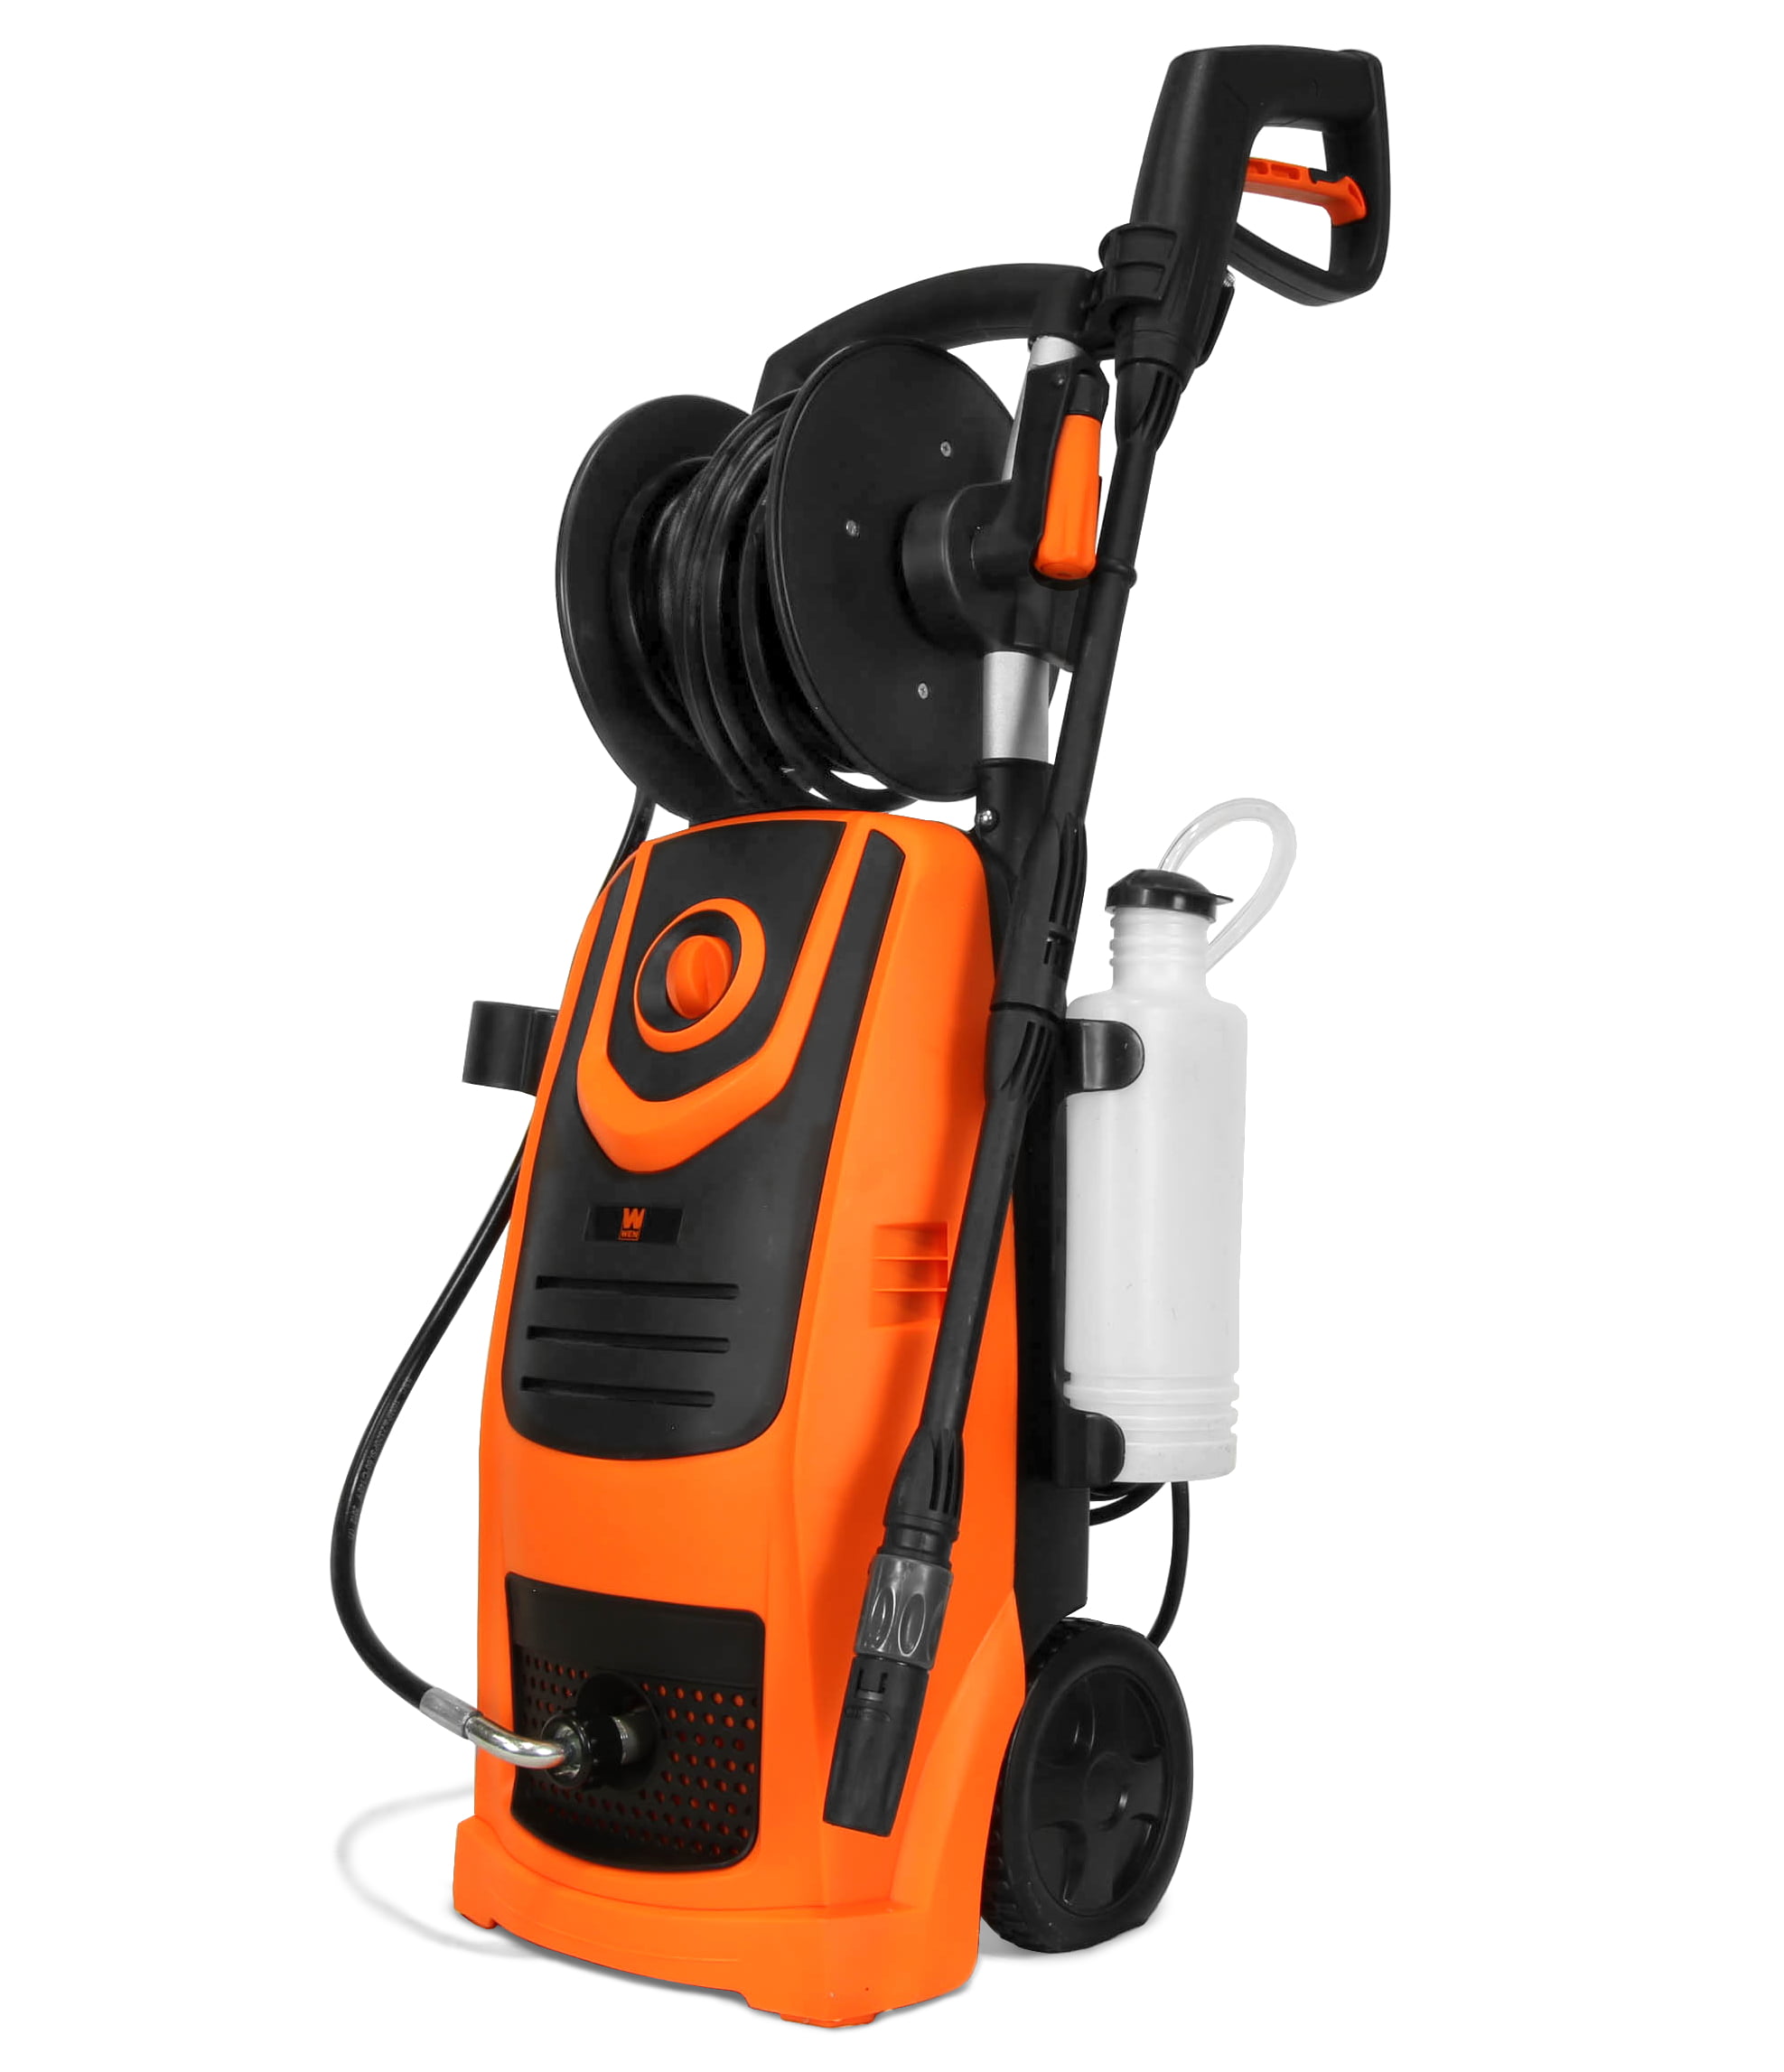 WEN 2100 PSI 1.3 GPM 13.5Amp Electric Pressure Washer with Variable